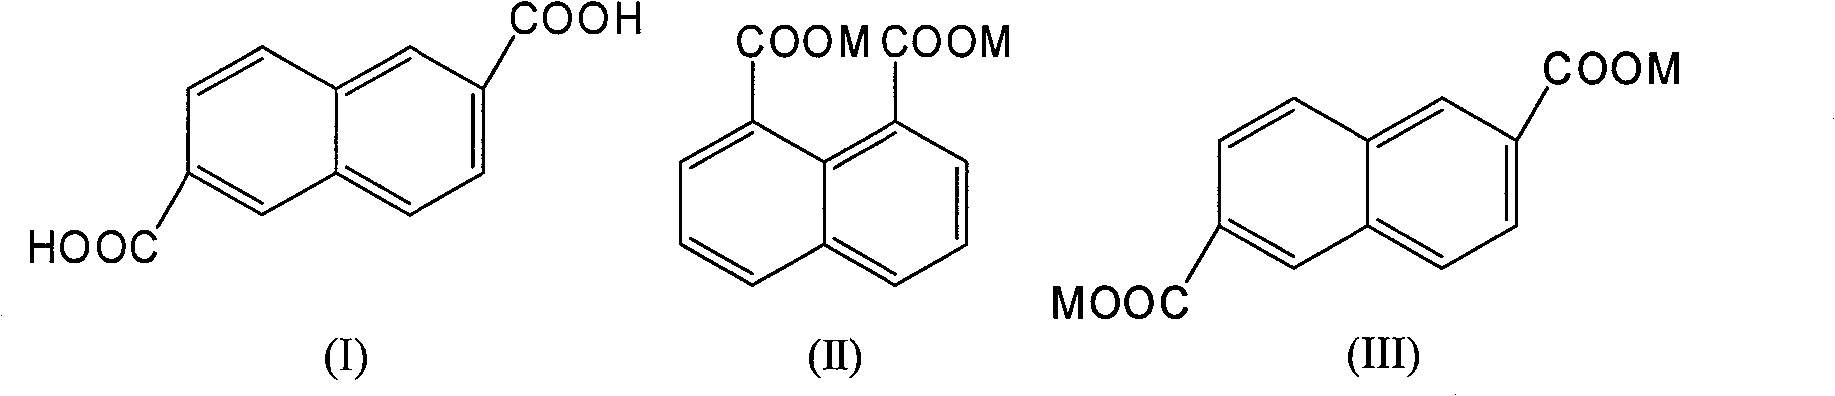 Carried molecular sieve catalyst and application thereof in 2,6-naphthalene dicarboxylic acid synthesis